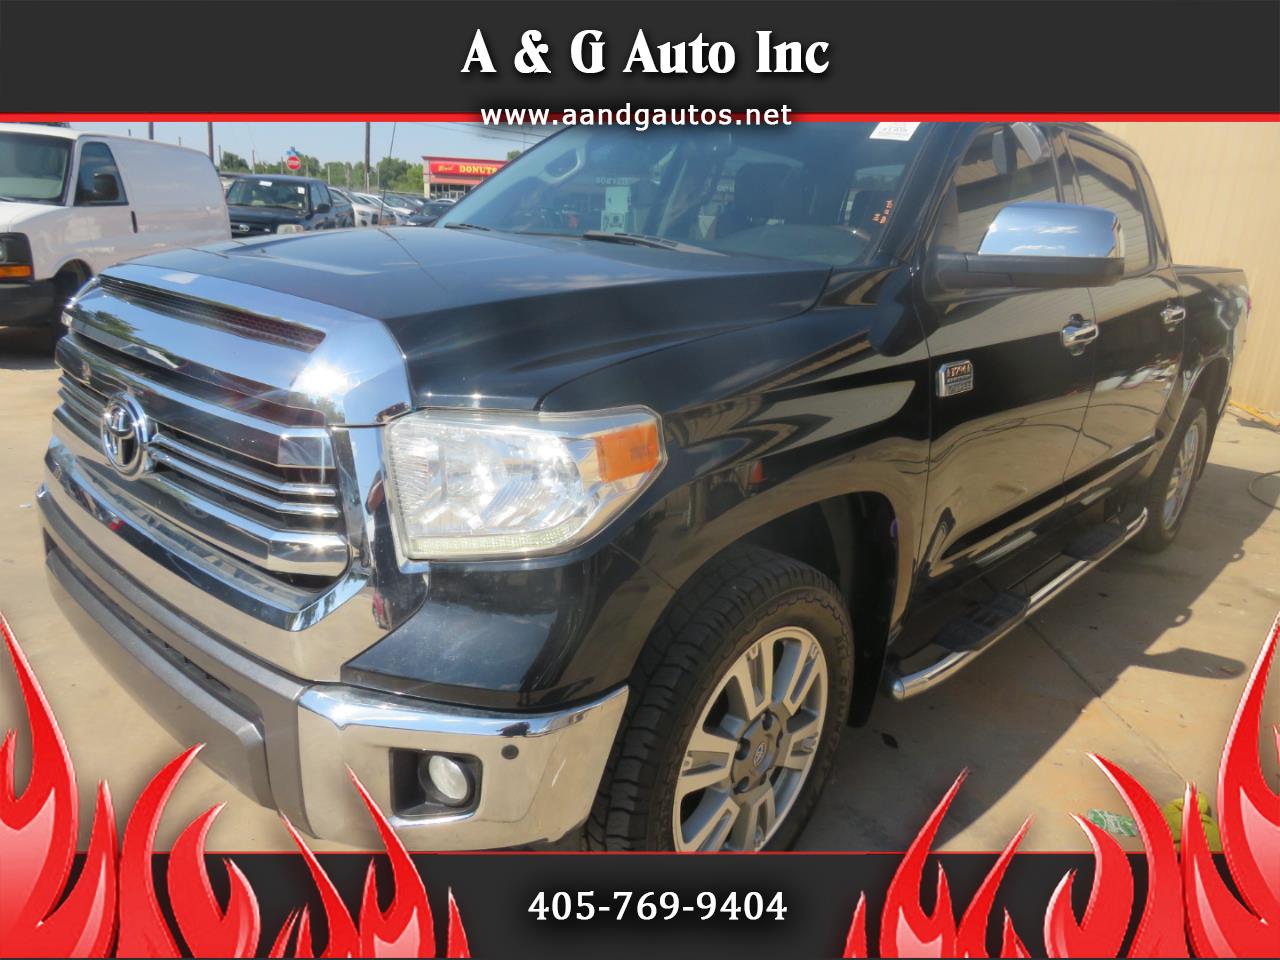 2016 Toyota Tundra for sale in Oklahoma City OK 73141 by A & G Auto Inc